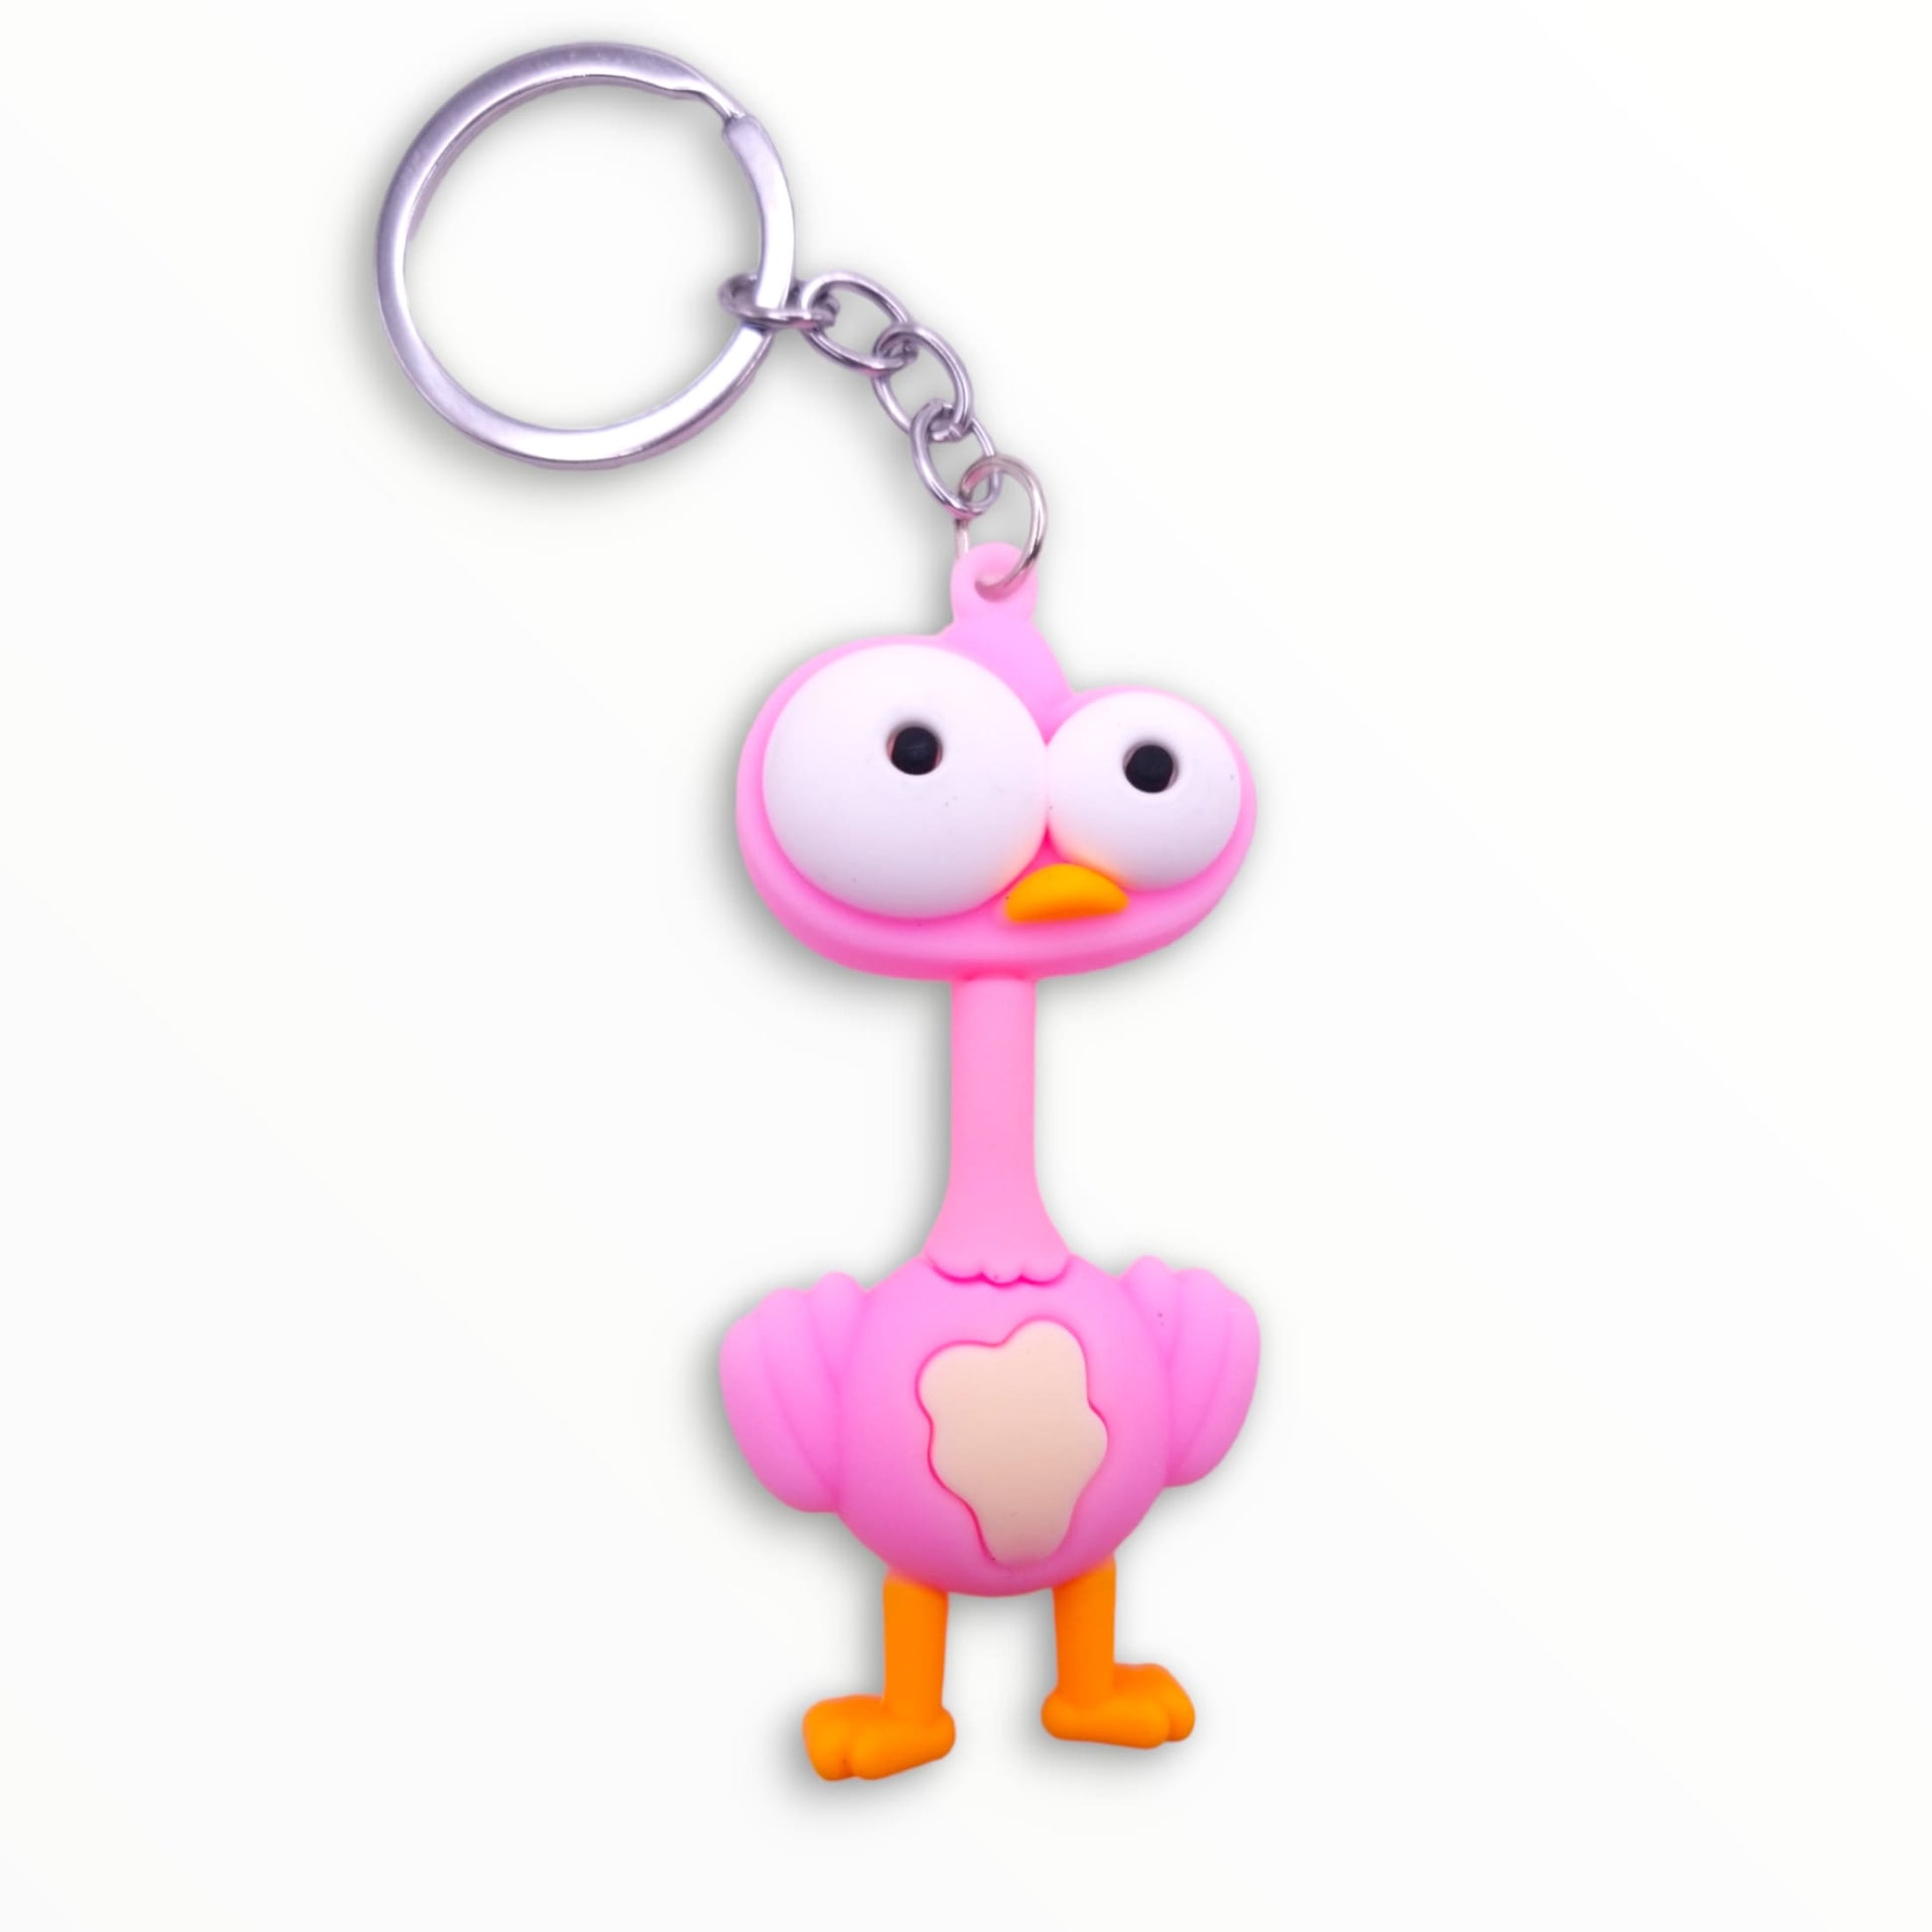 Funny Pink Bird Keychain from Confetti Kitty, Only 4.99